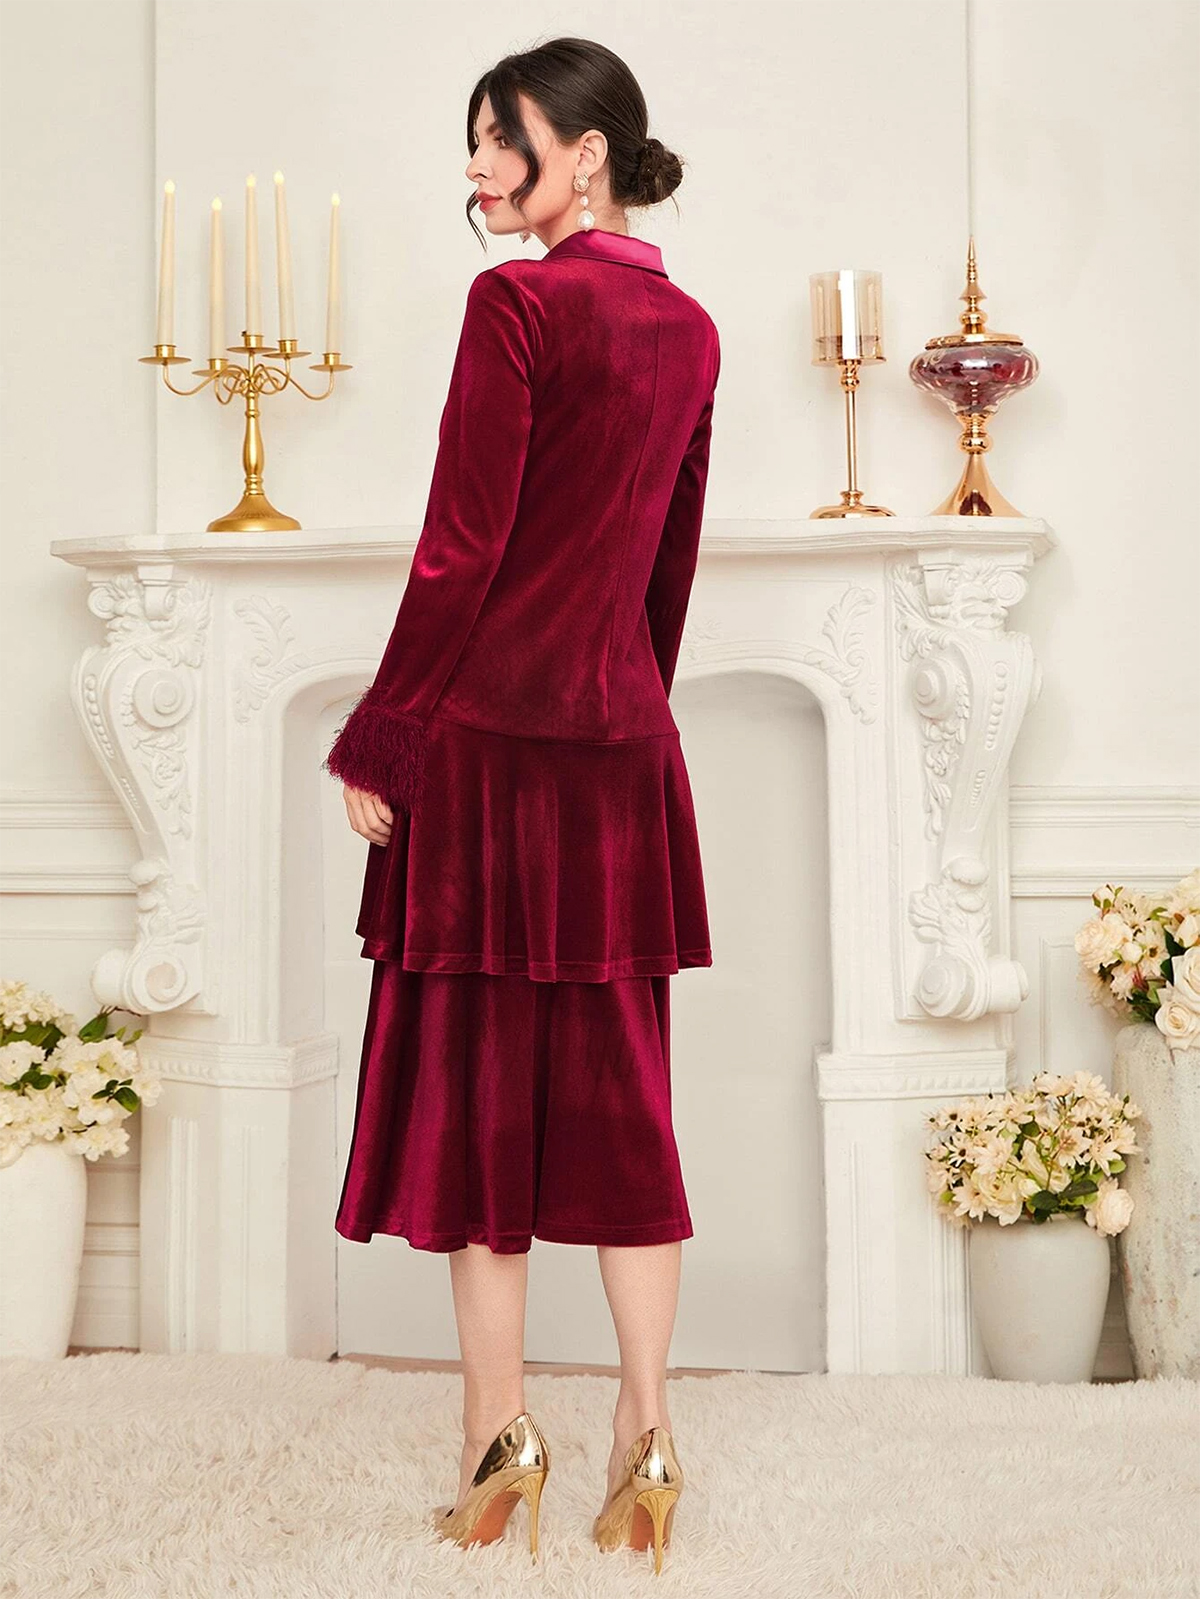 Burgundy Velvet Women Dress Suits V Neck Evening Party Ladies Tuxedos For Wedding Two Pieces Jacket And Skirt